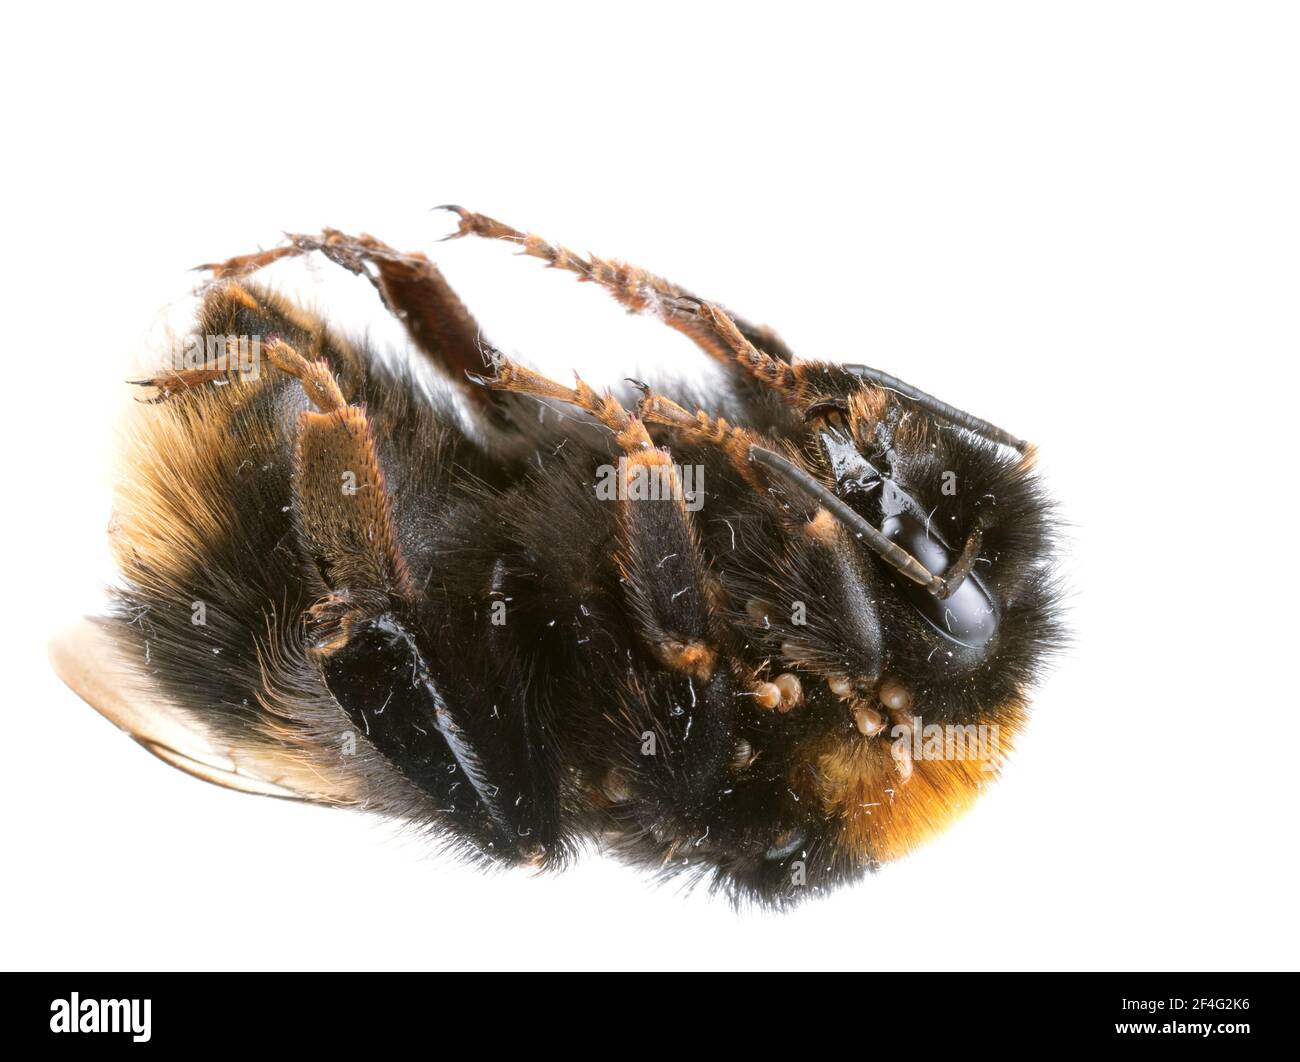 Found dead - Bombus terrestris aka buff-tailed or large earth bumblebee with nest mites. Stock Photo